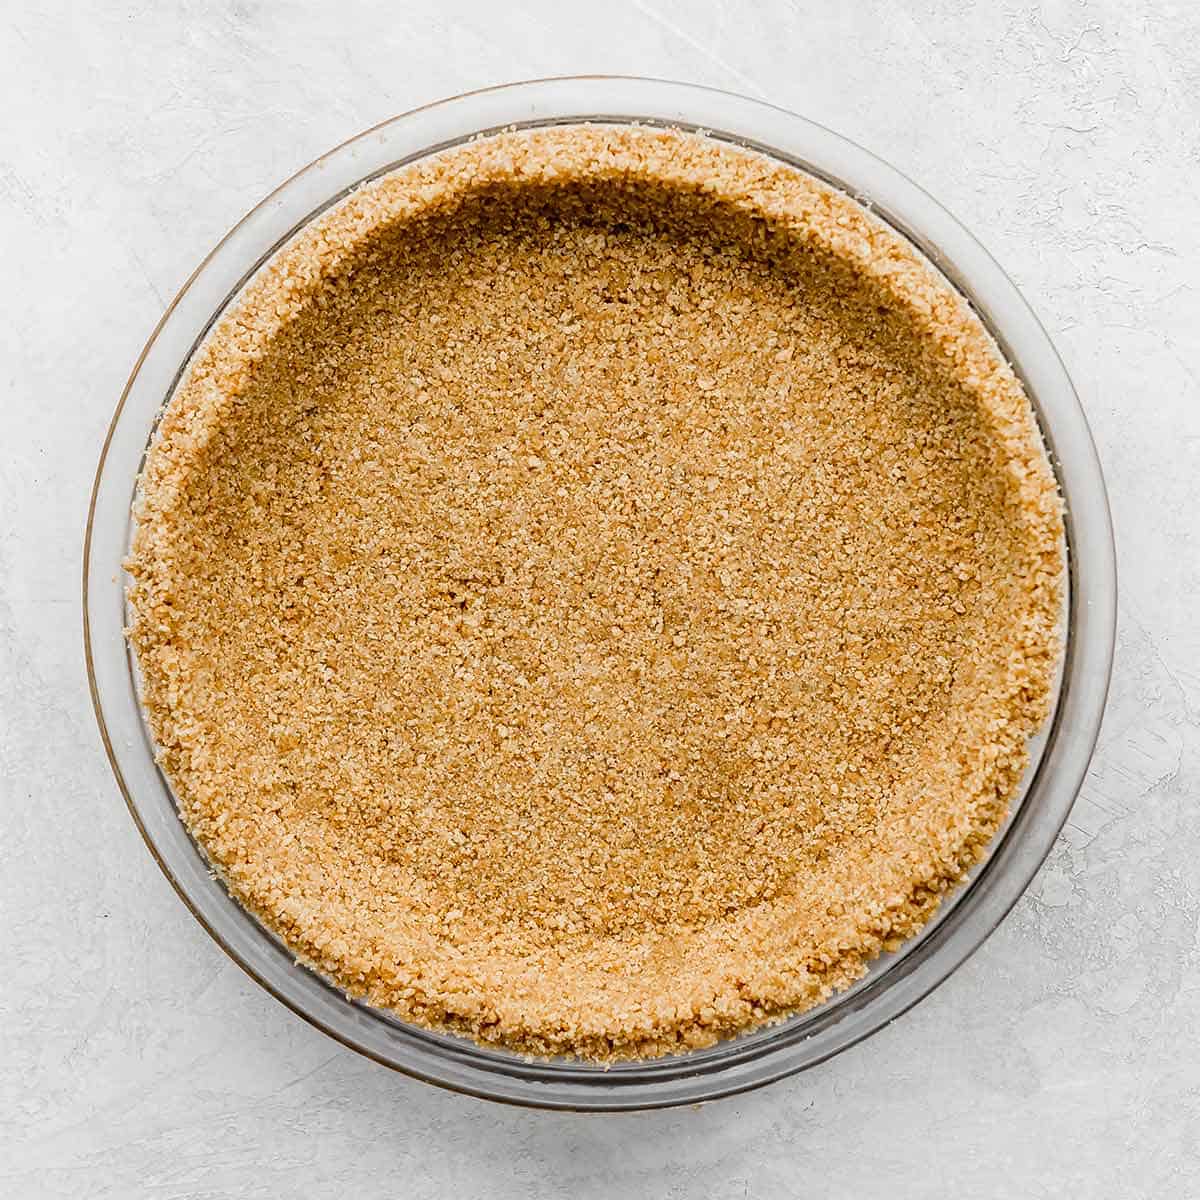 A homemade Graham Cracker Crust pressed into a pie plate on a light gray background.